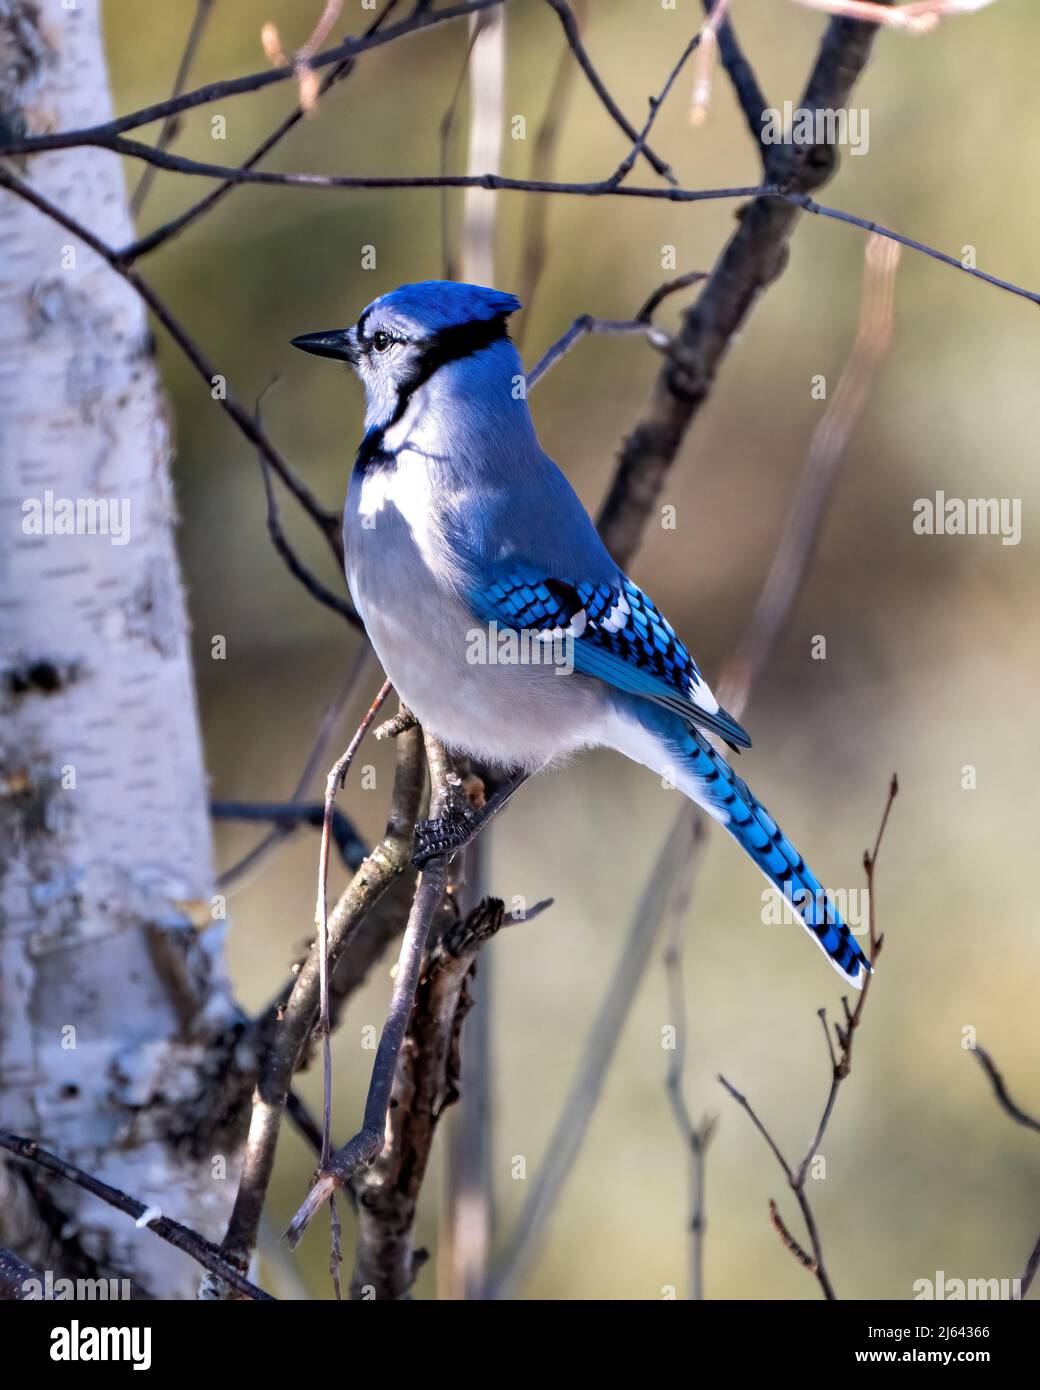 Blue jay bird beautiful bird Cut Out Stock Images & Pictures - Alamy